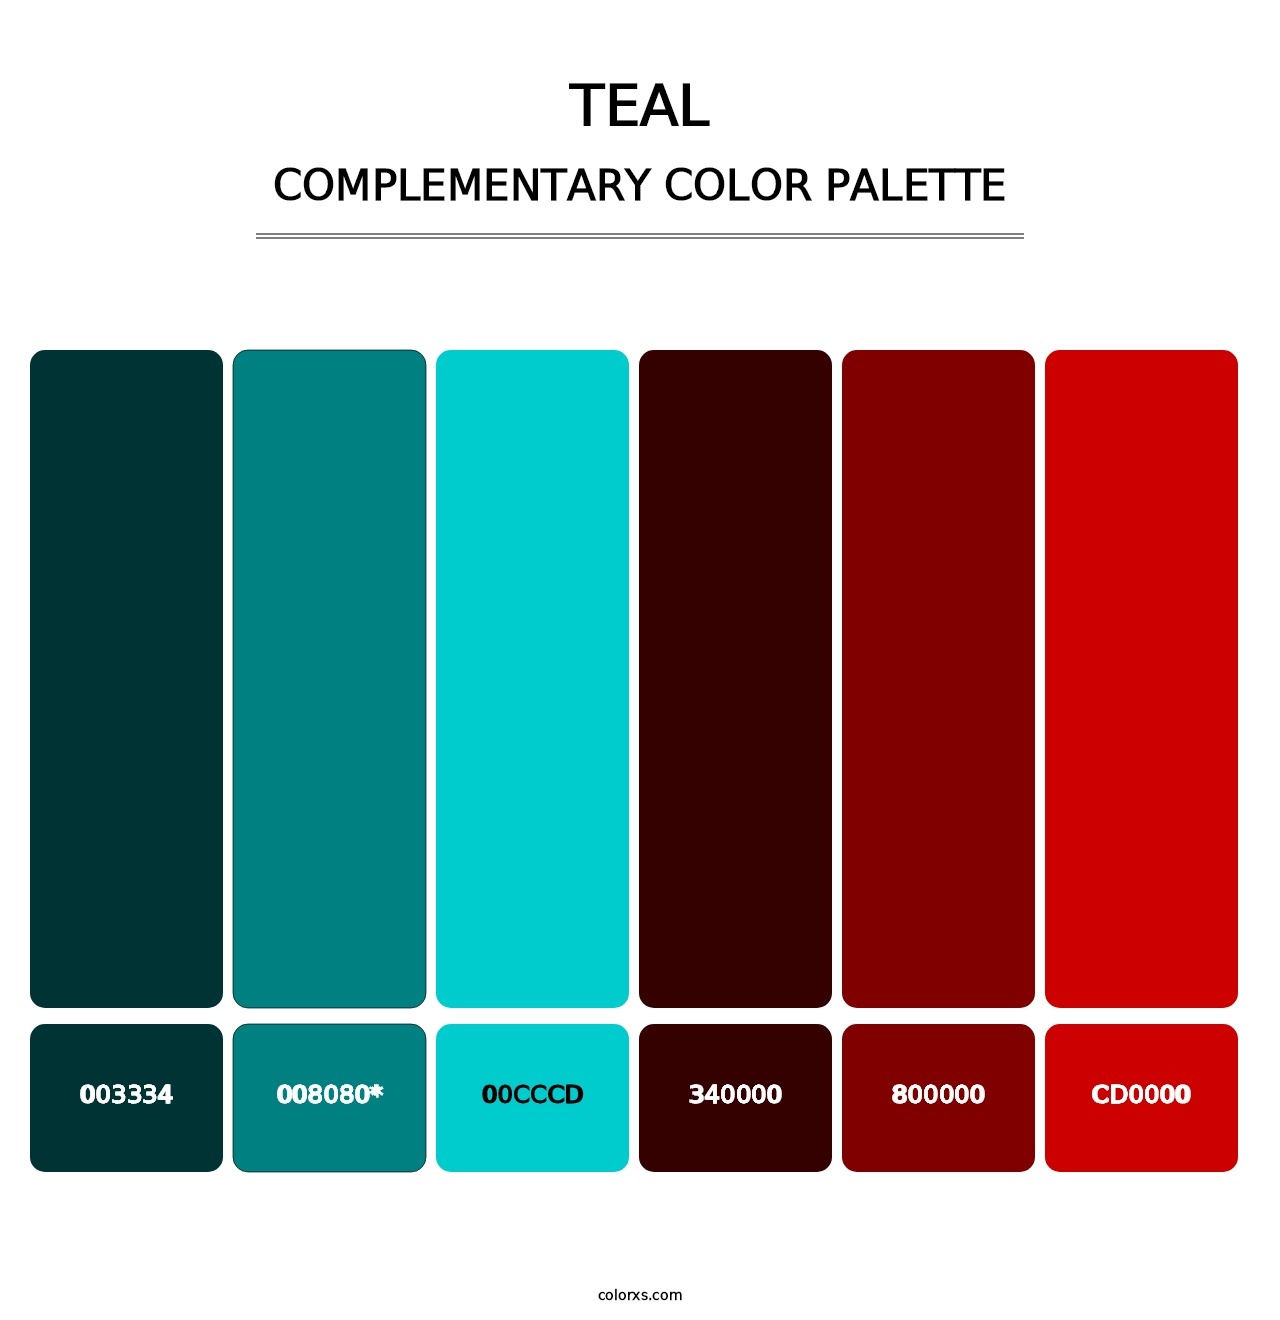 Teal - Complementary Color Palette